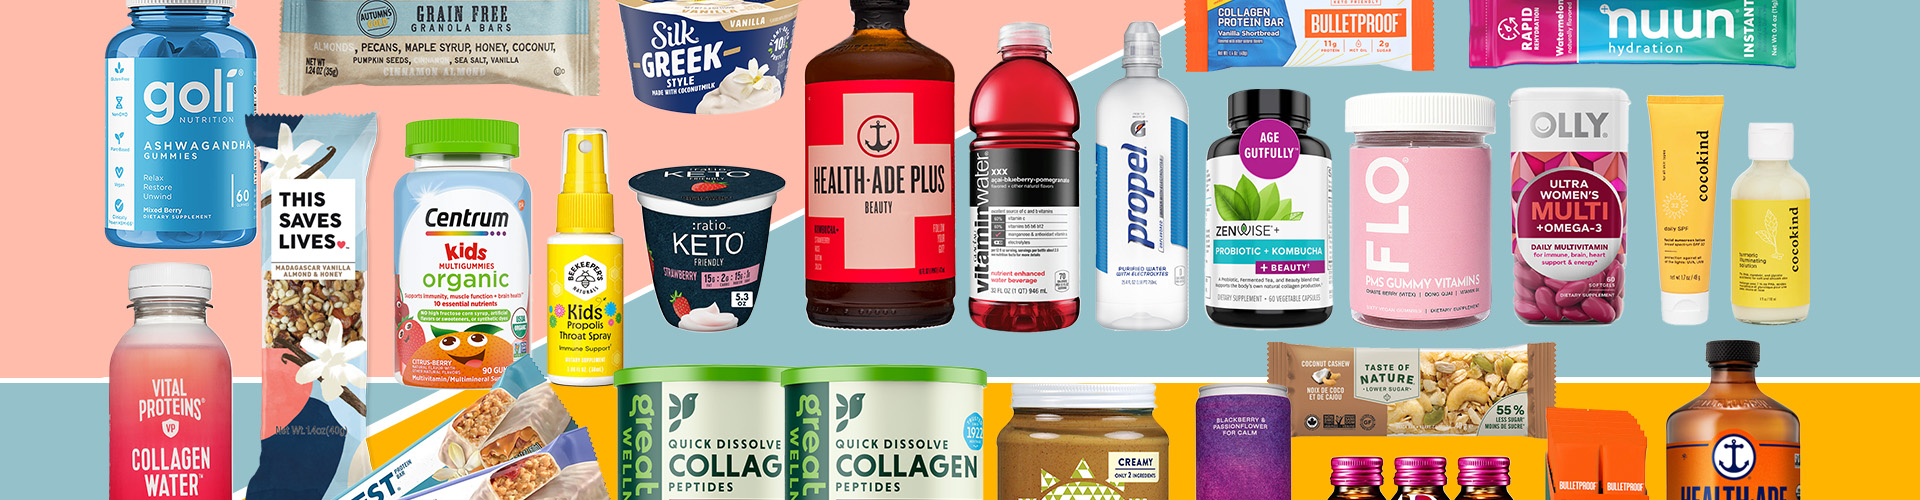 Complicated wellness products collage banner